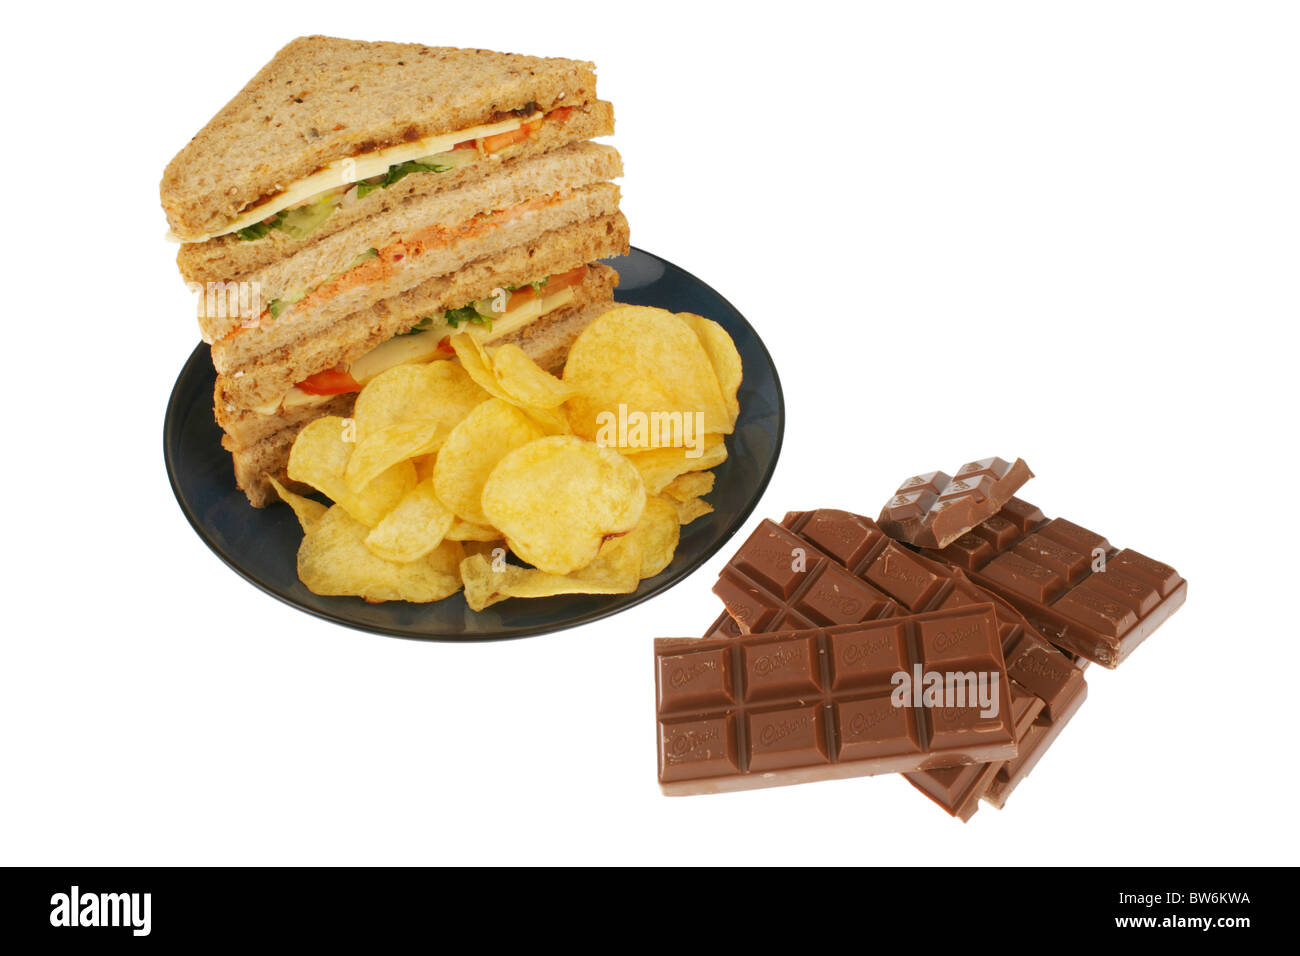 Sandwiches and Chocolate Stock Photo